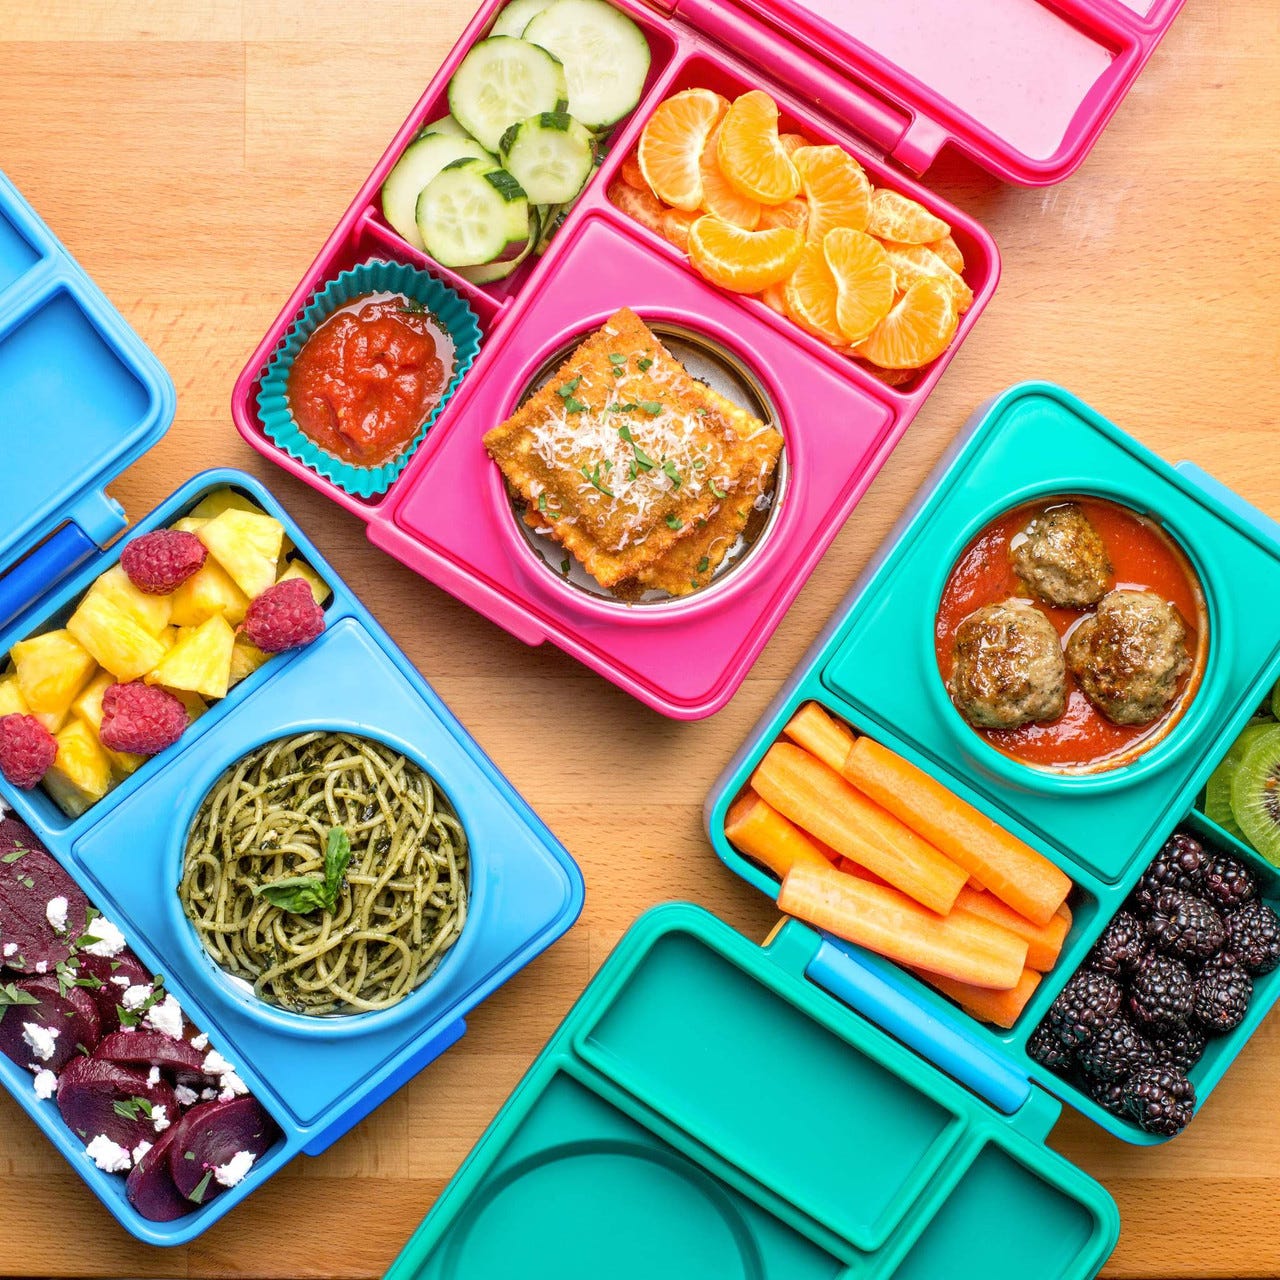 Get Your Kids Back To School and Excited About Lunch With OmieBox